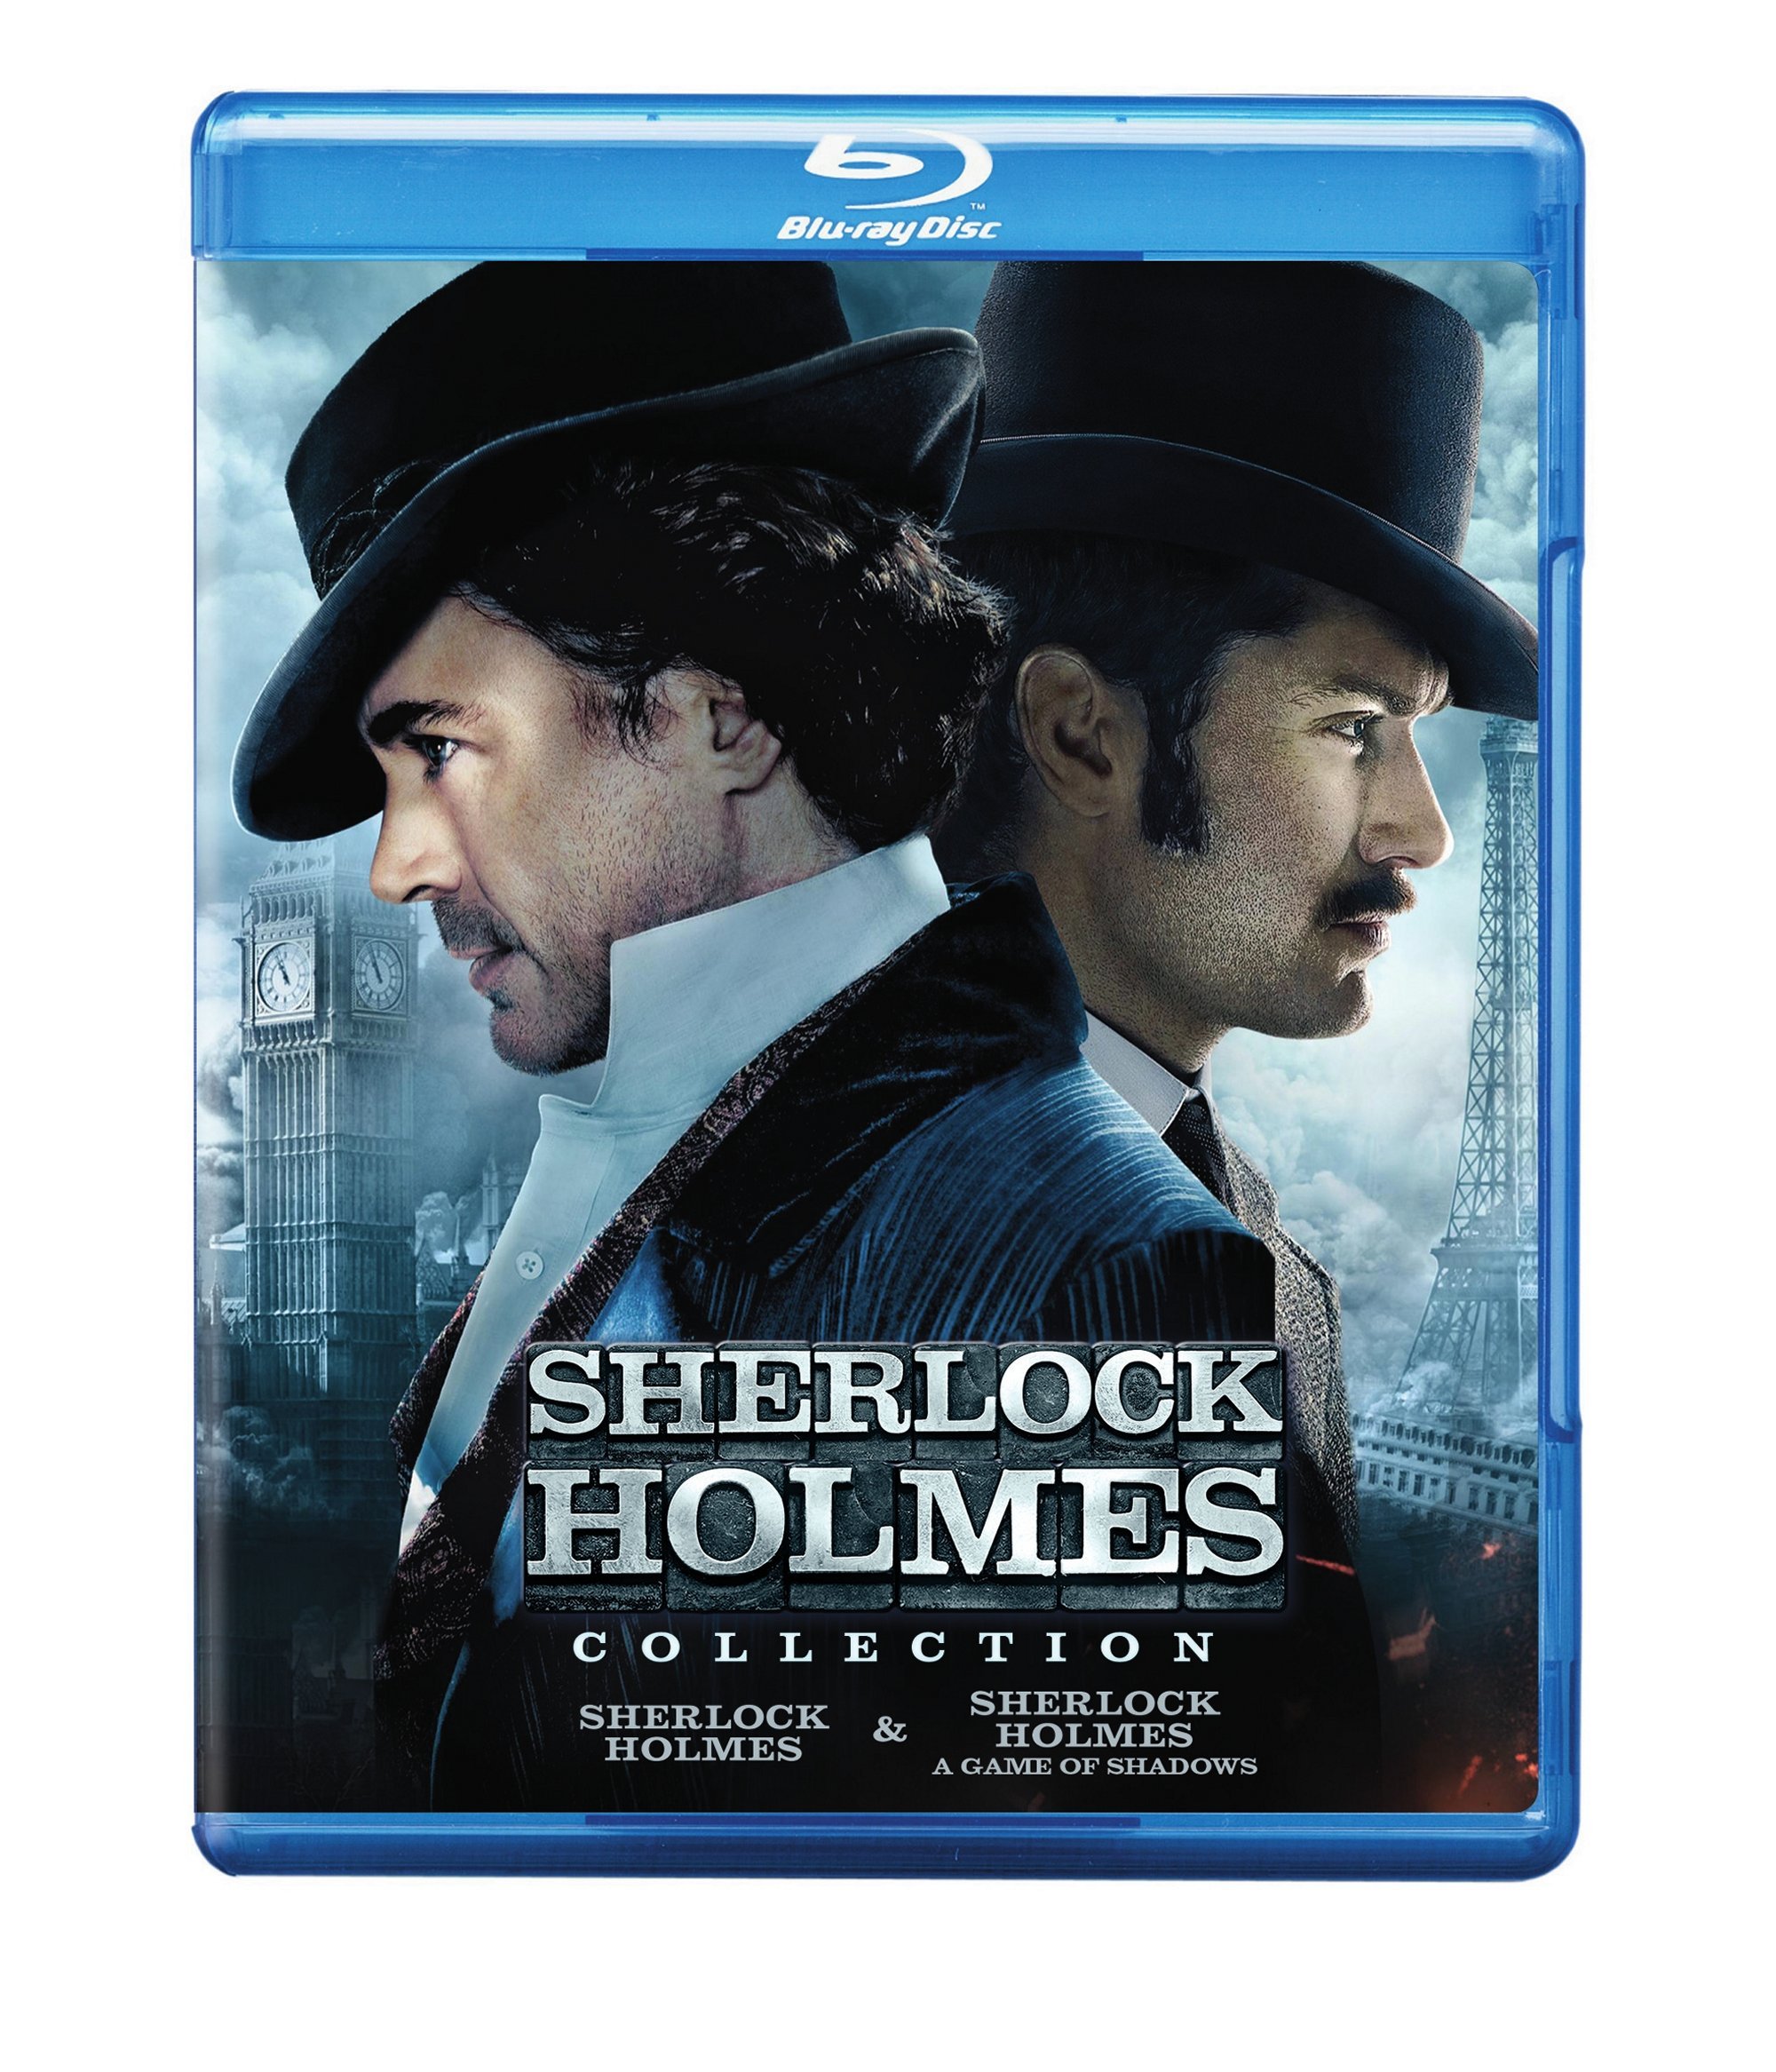 Book Cover Sherlock Holmes Collection (Sherlock Holmes / Sherlock Holmes: A Game Of Shadows) Blu-ray [Import]